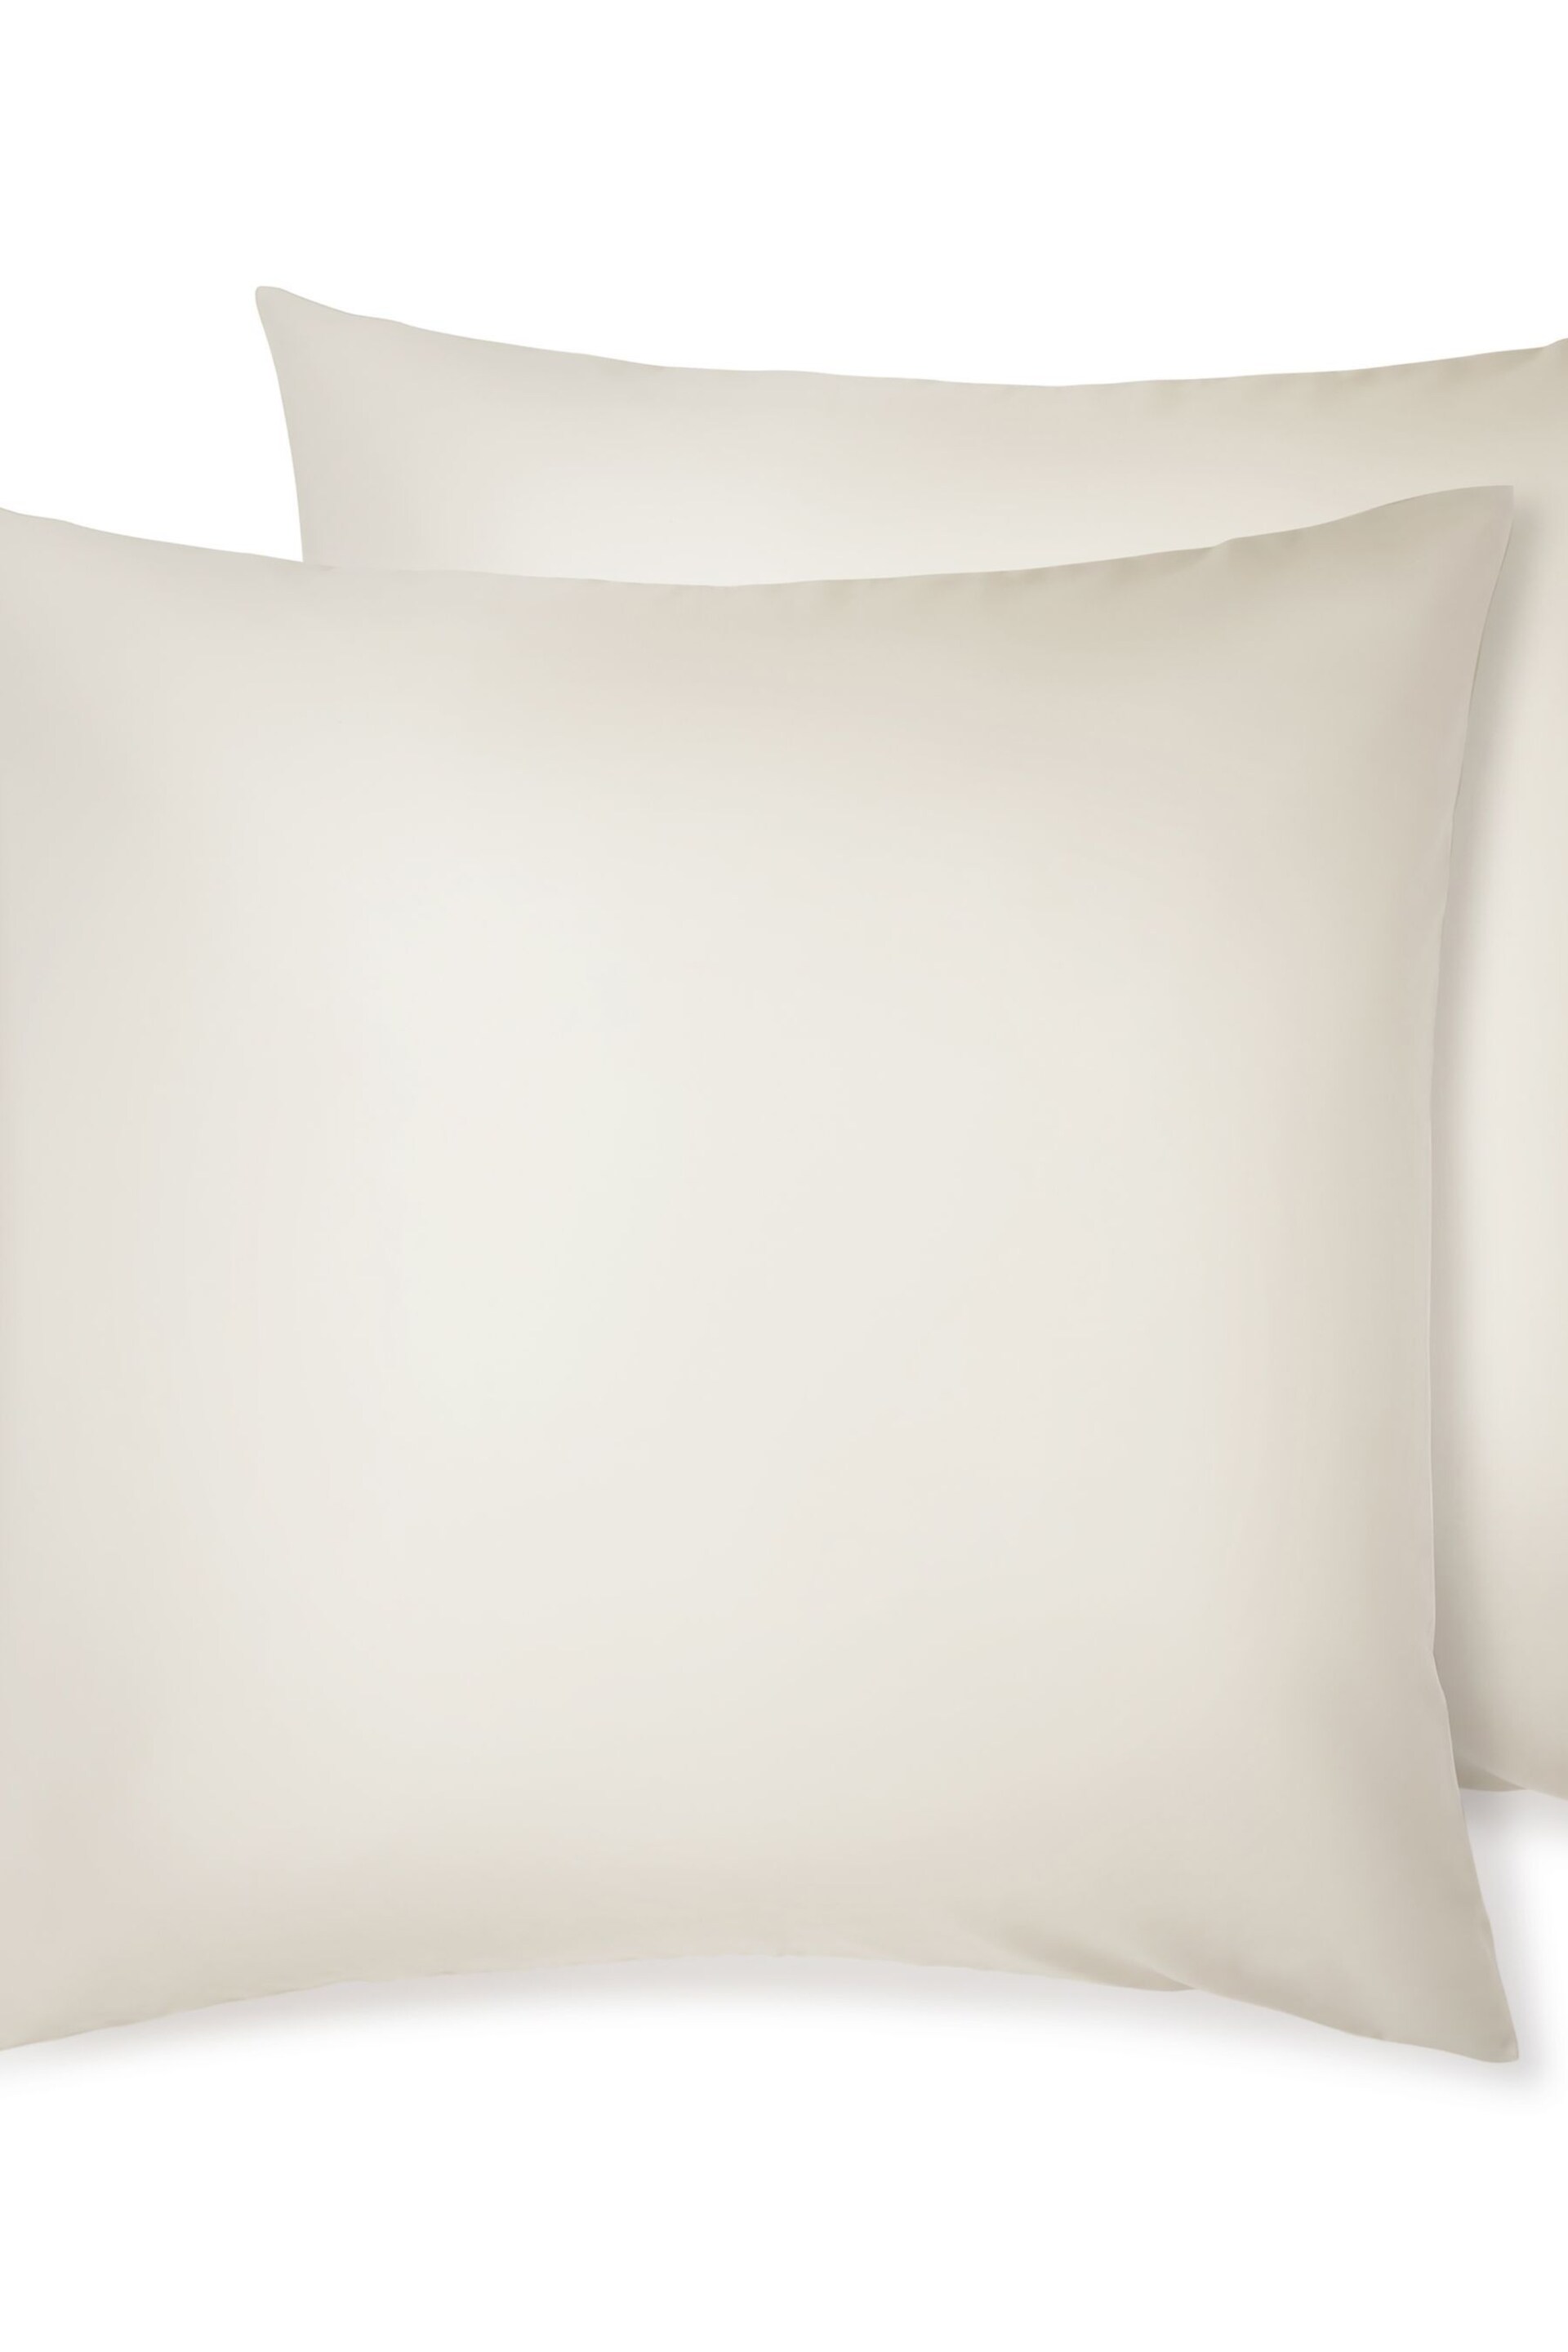 Bedfolk Set of 2 Natural Luxe Cotton Square Pillowcases - Image 2 of 3